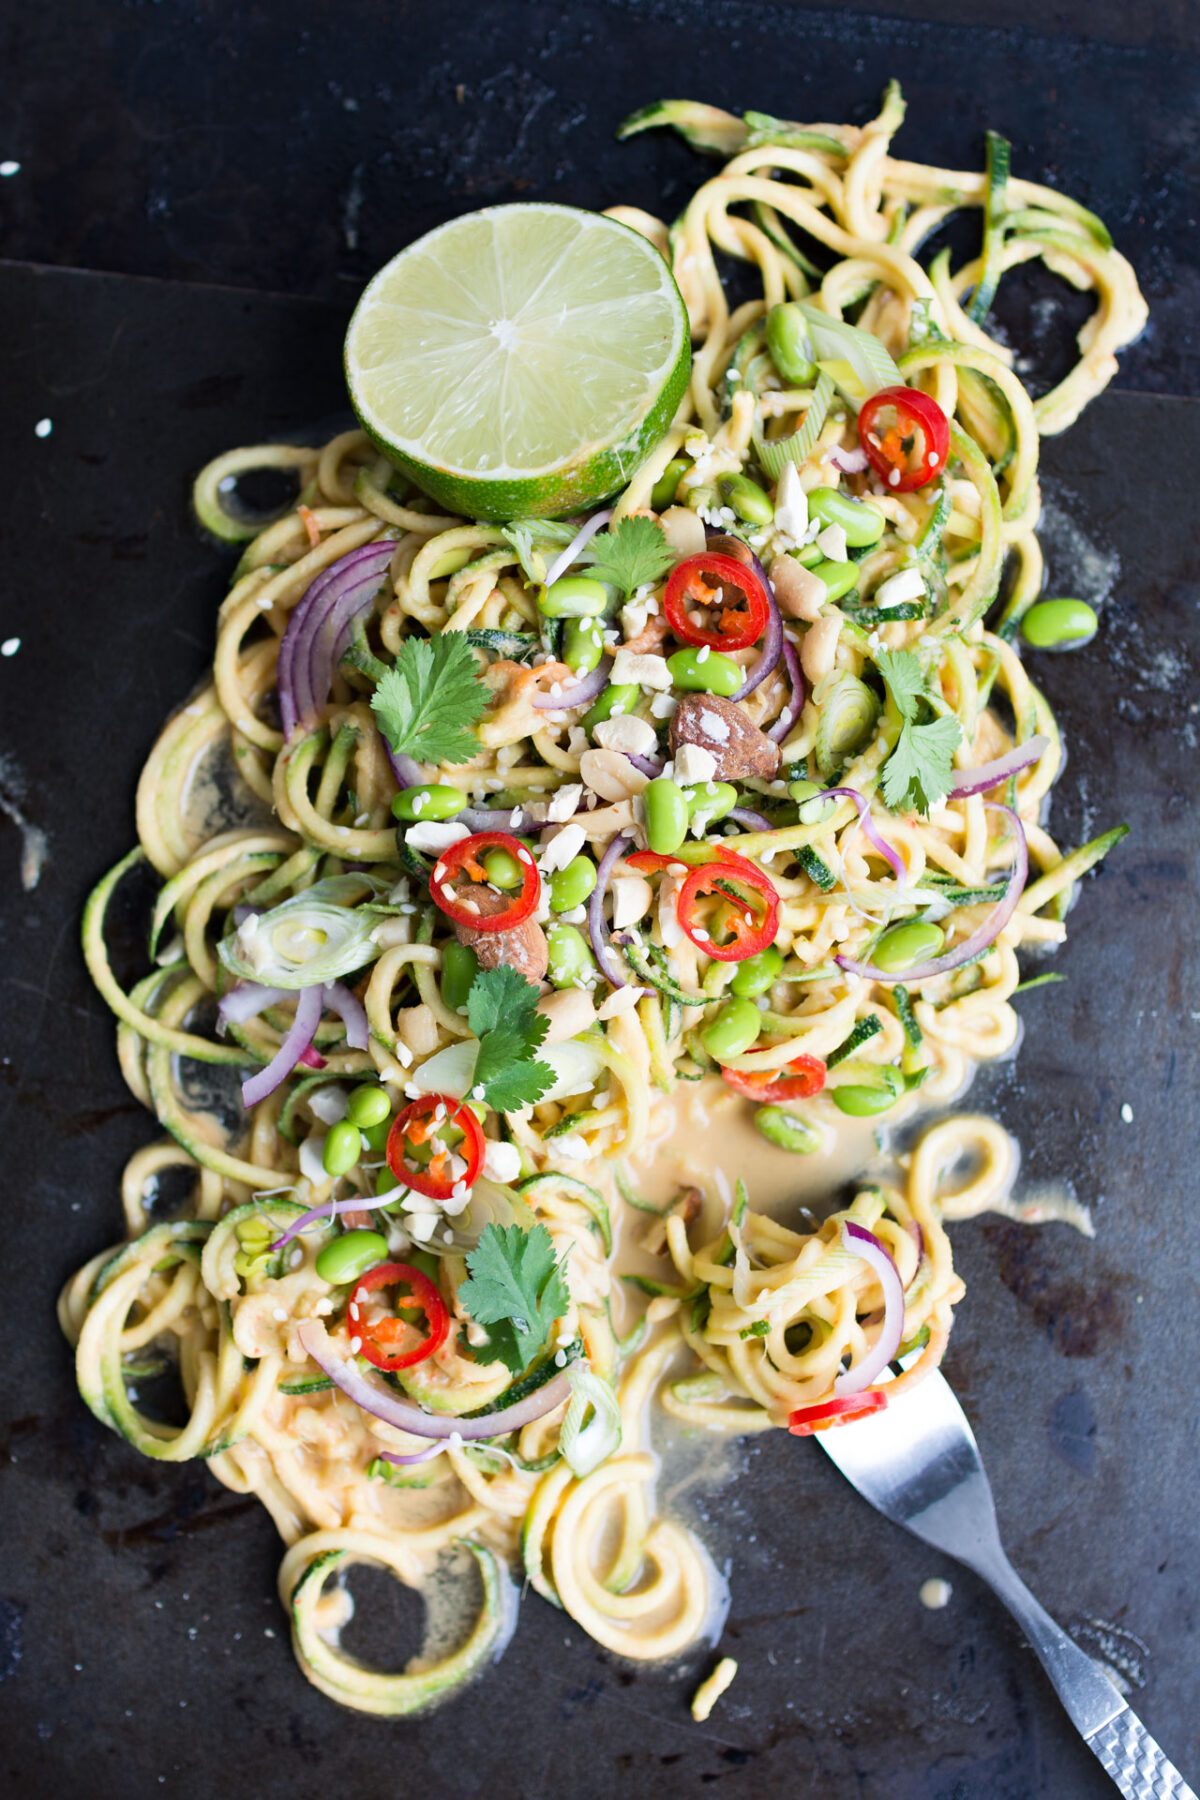 top view image of a thai zucchini noodle salad with fork, top with edamame beans, onions, chopped red chili, peanuts, spring onions, parsley, and sesame seeds